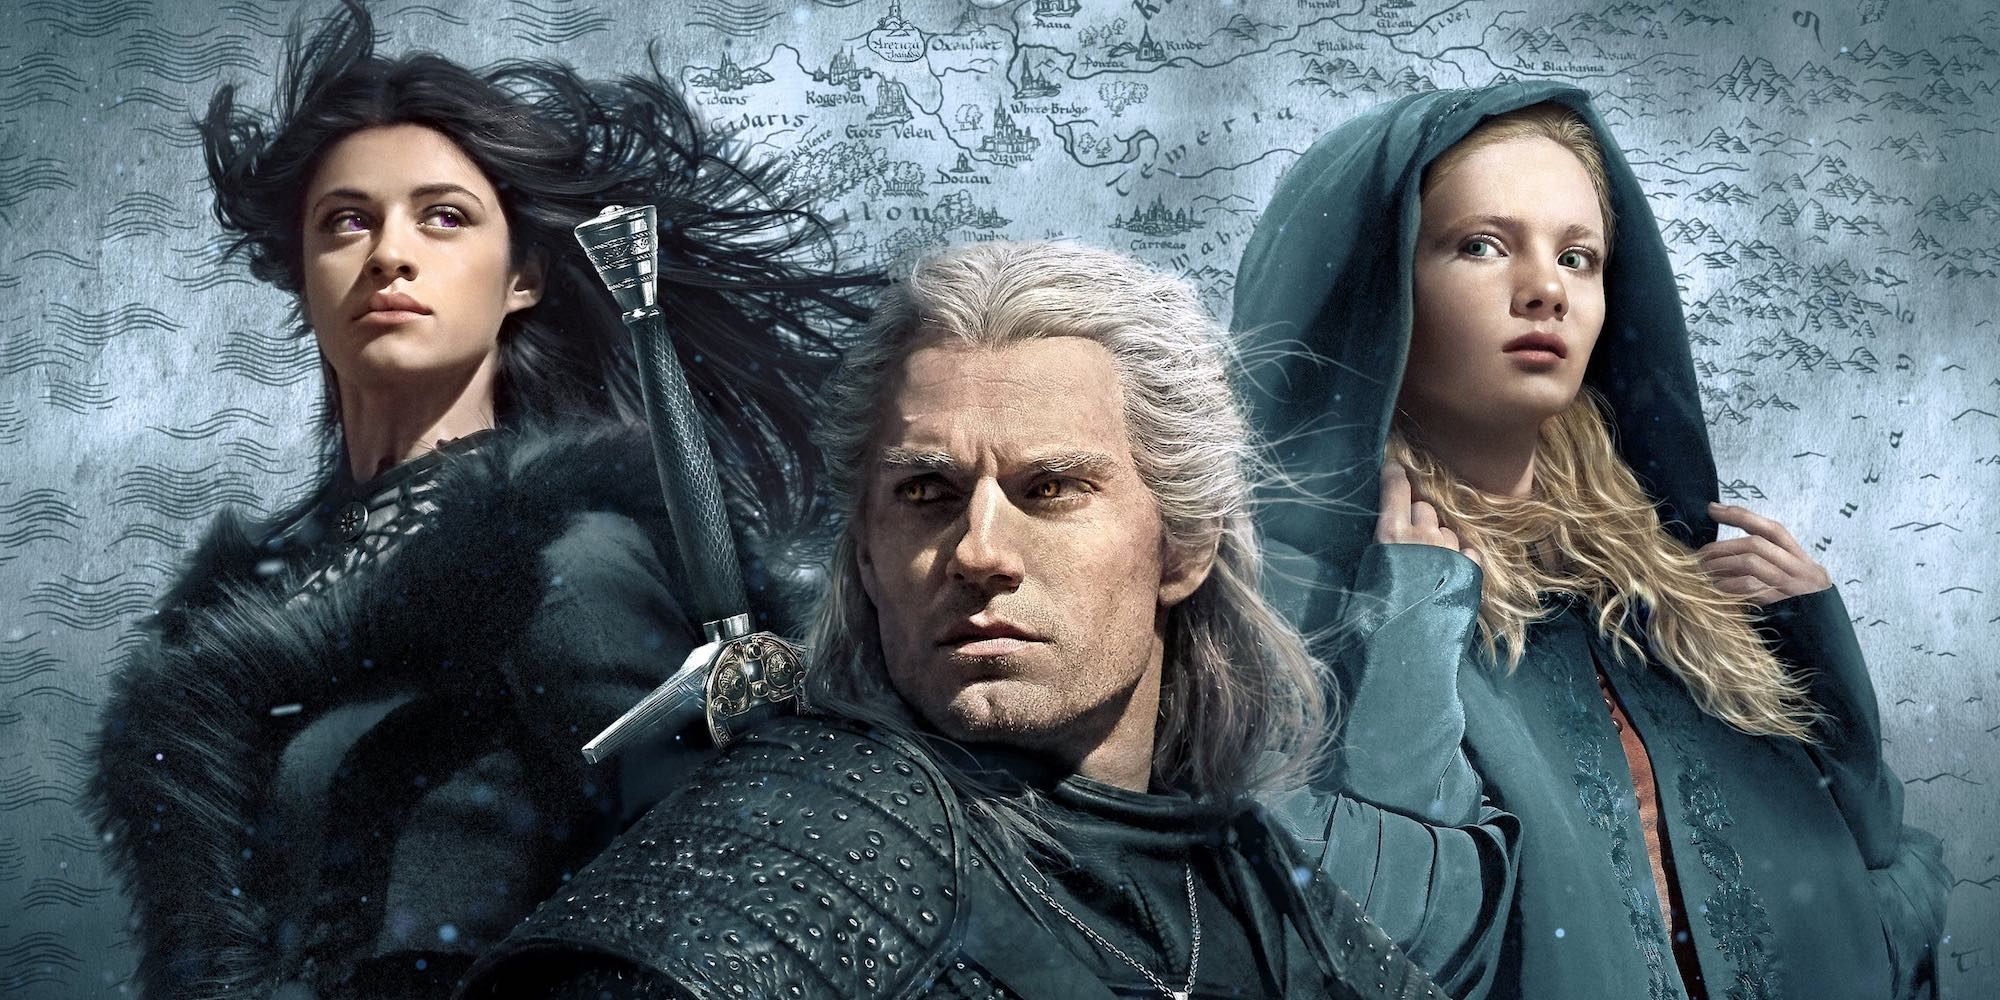 Yennefer, Geralt and Ciri star in The Witcher